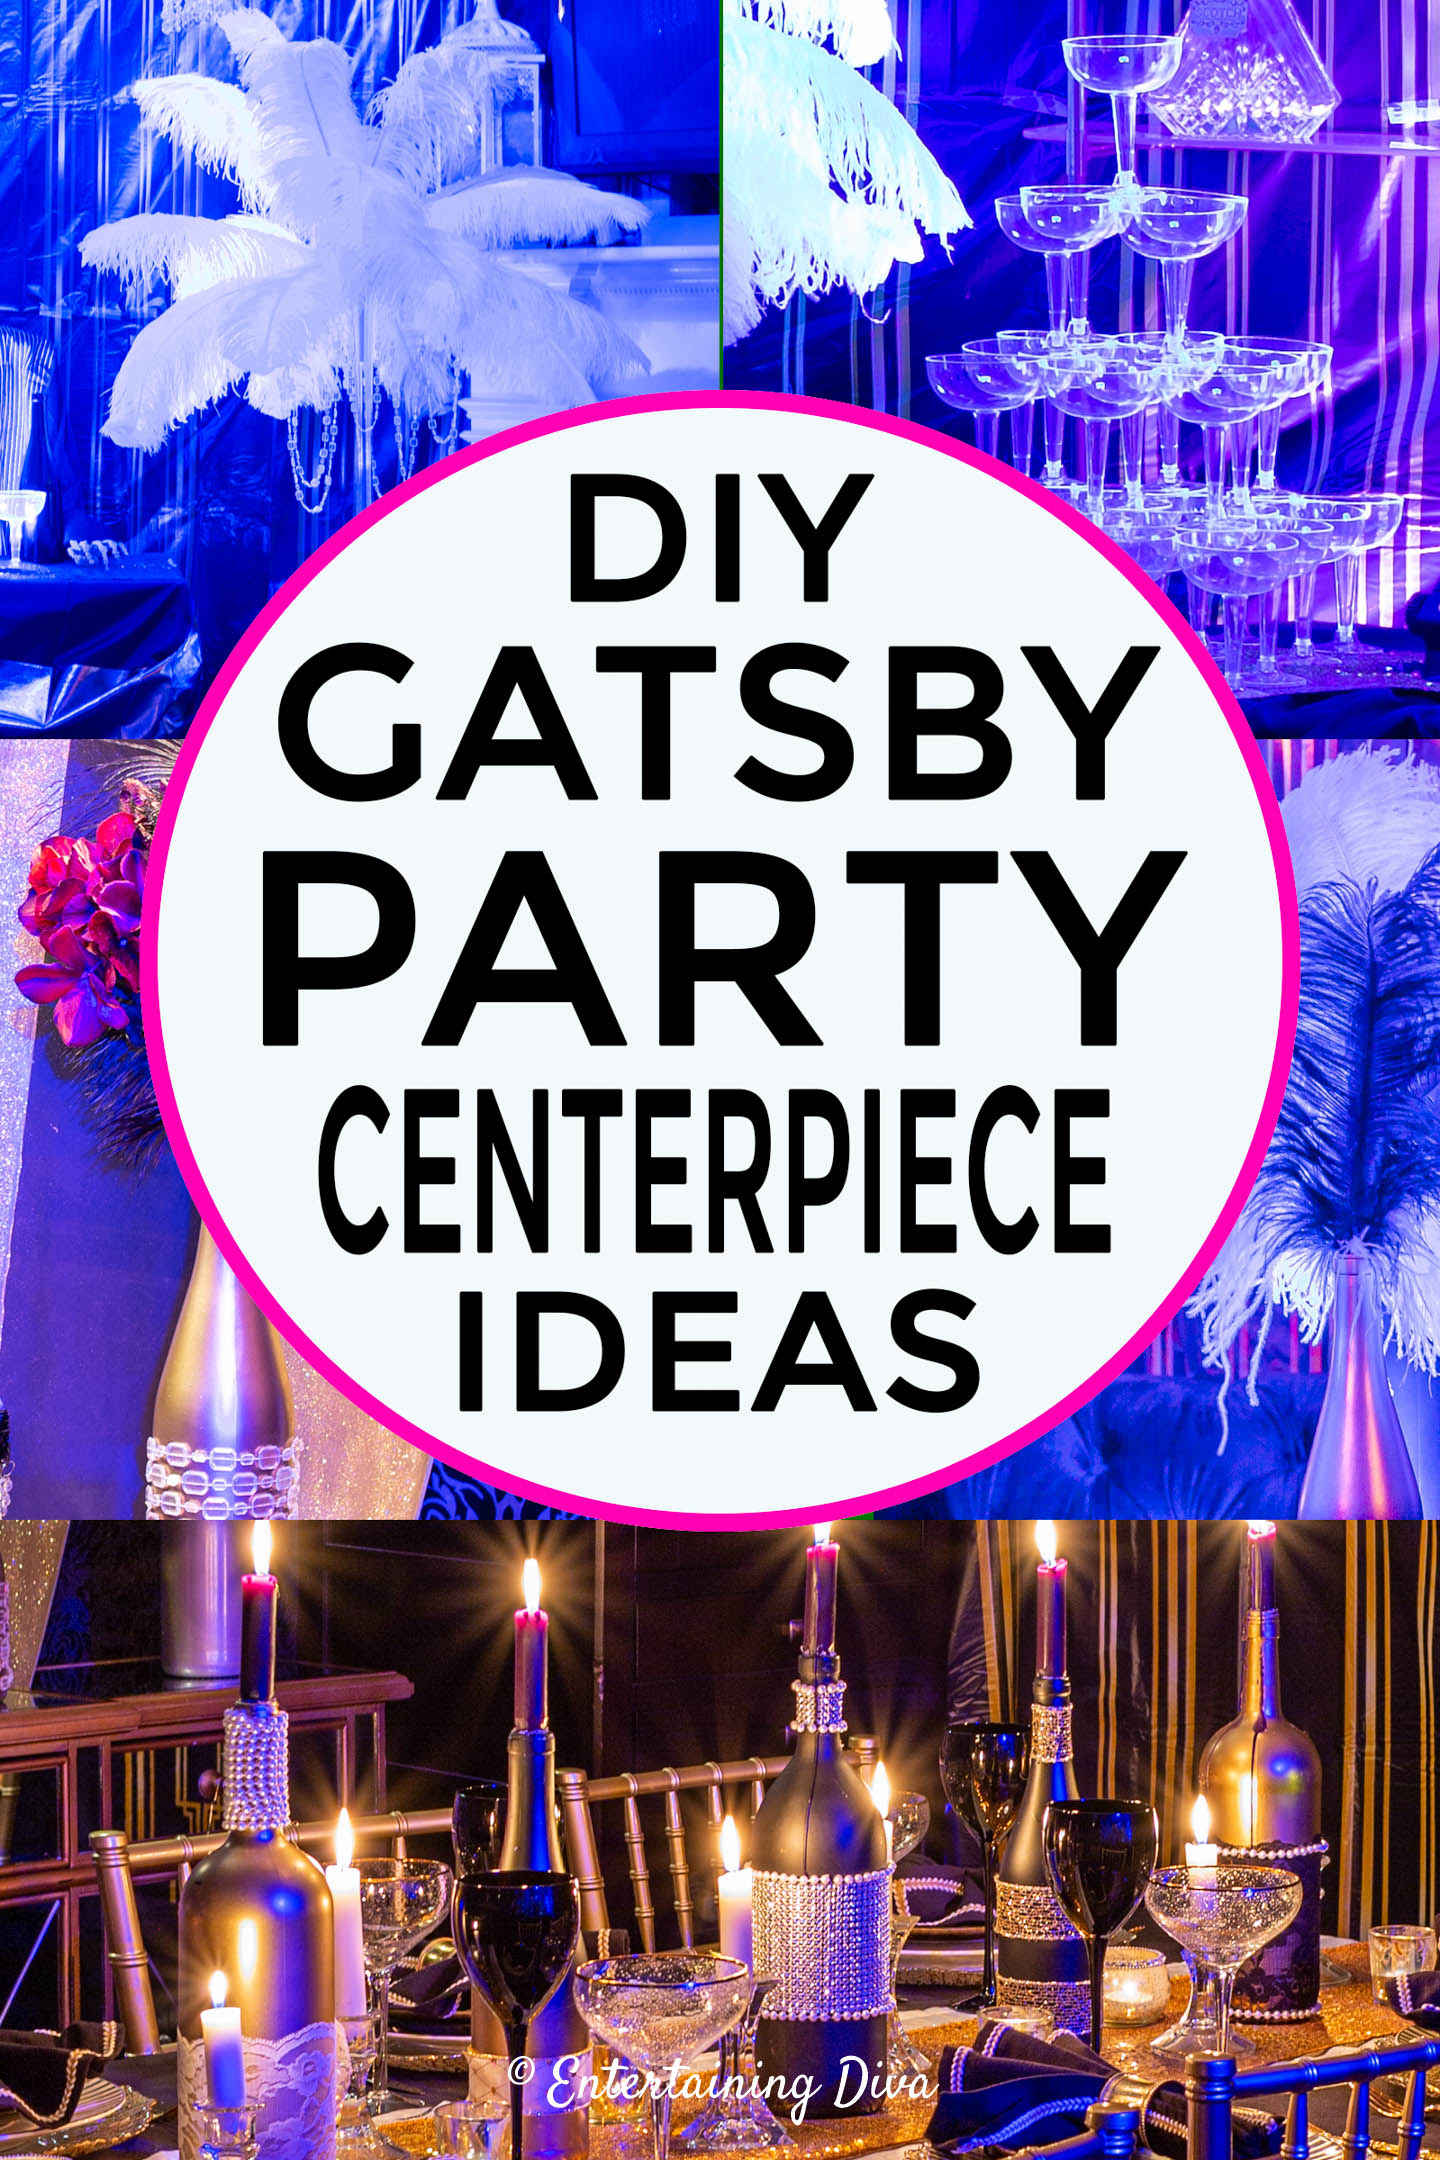 Great Gatsby centerpieces